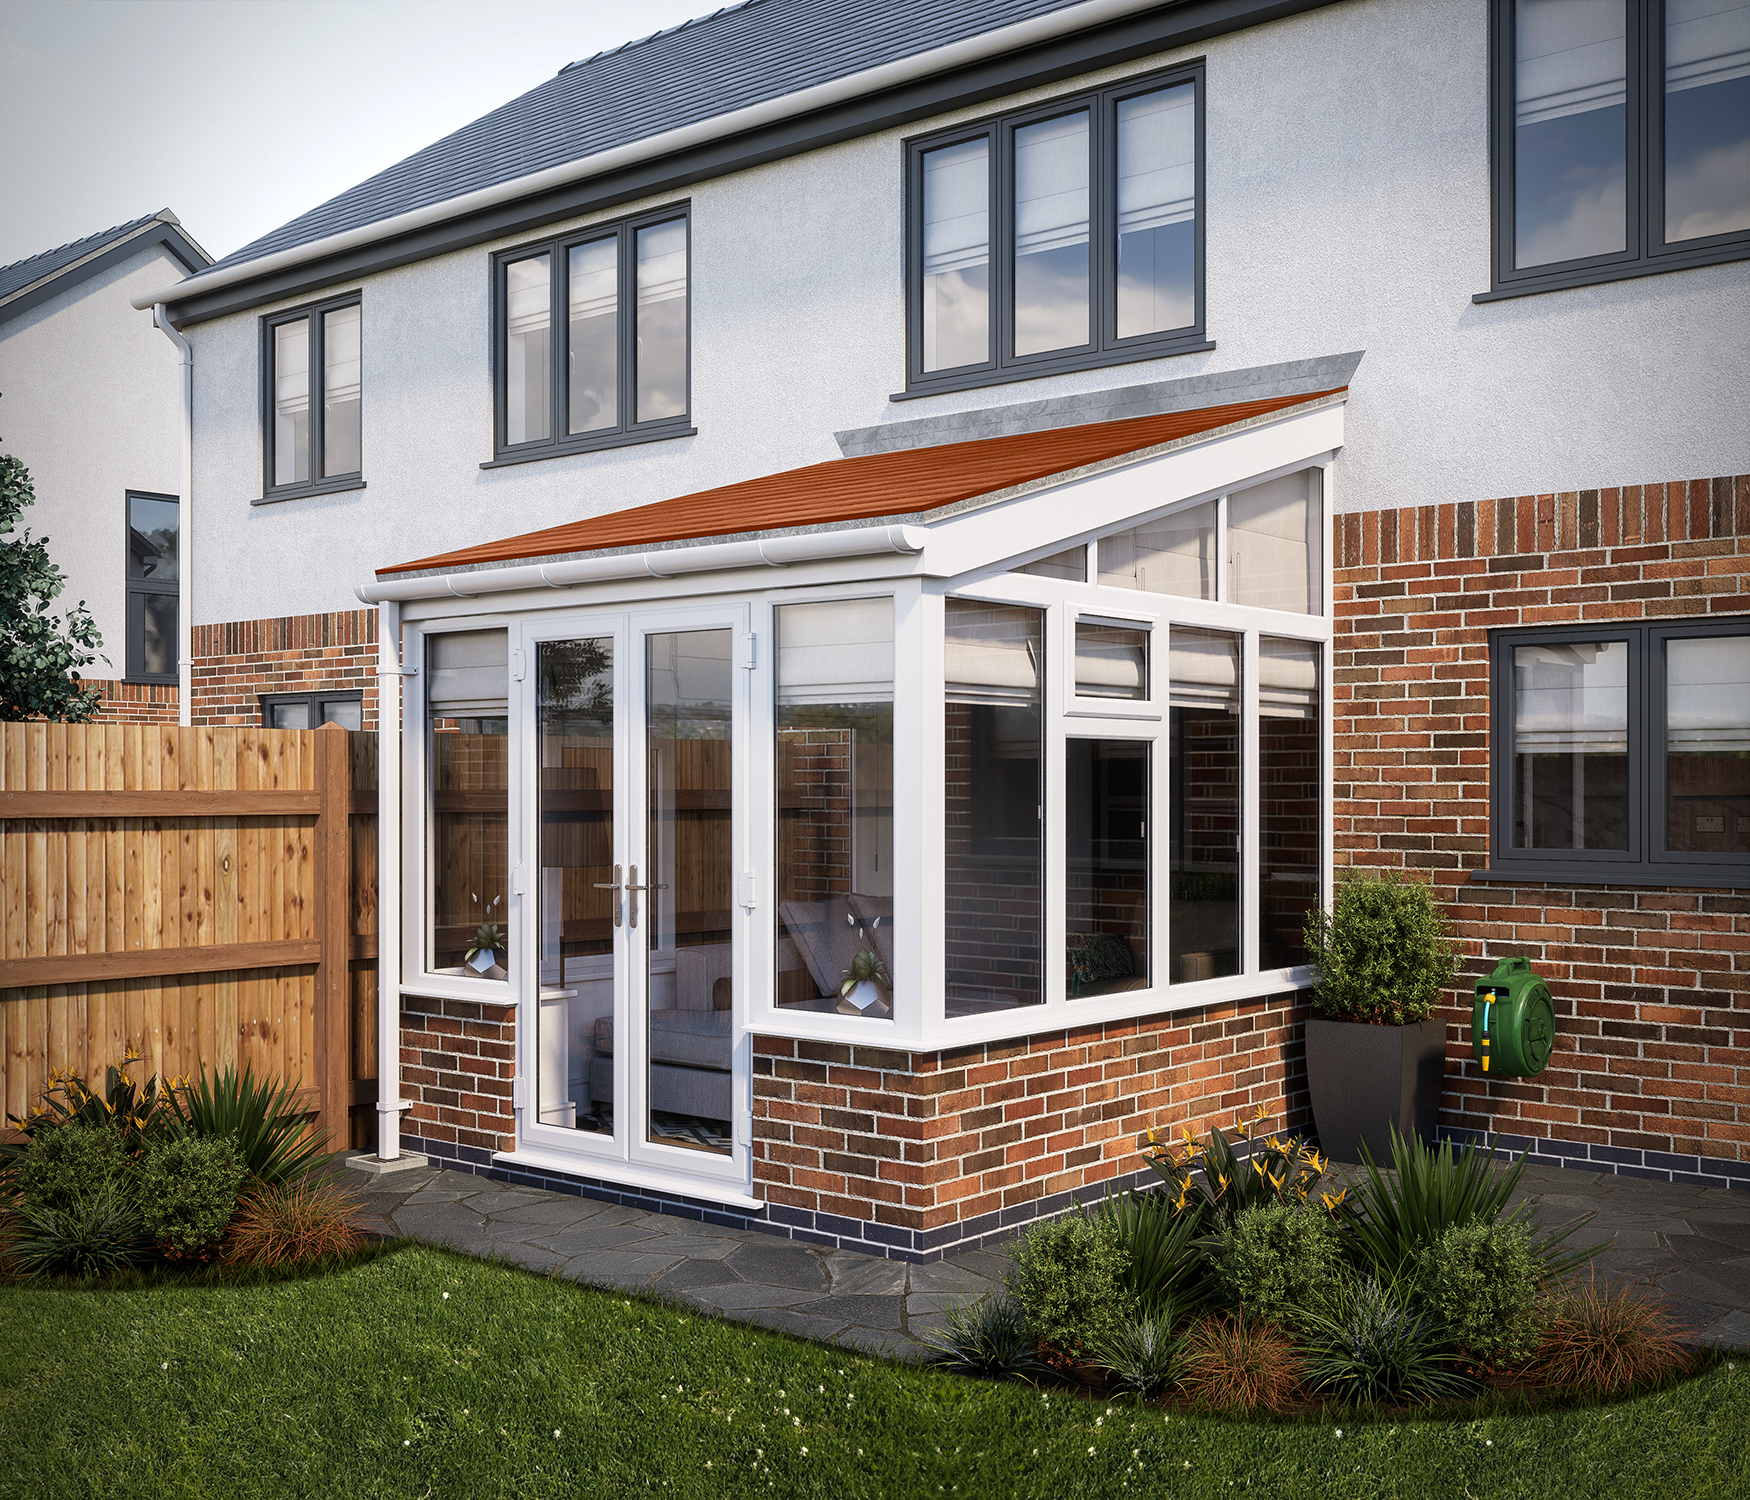 Image of SOLid Roof Lean to Conservatory White Frames Dwarf Wall with Rustic Terracotta Tiles - 13 x 10ft